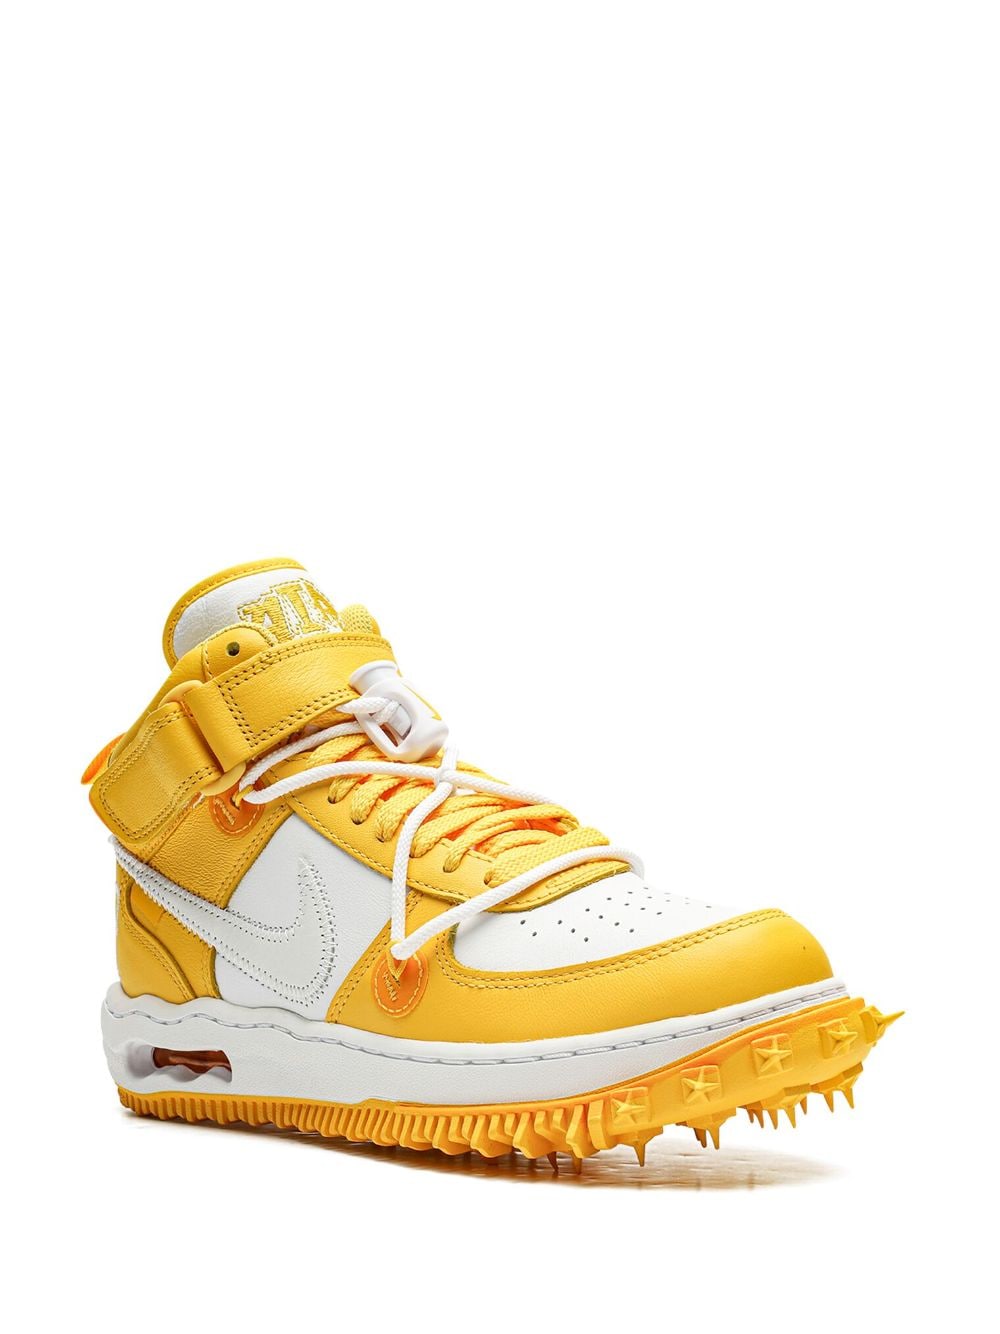 Image 2 of Nike baskets Air Force 1'Off-White - Varsity Maize'